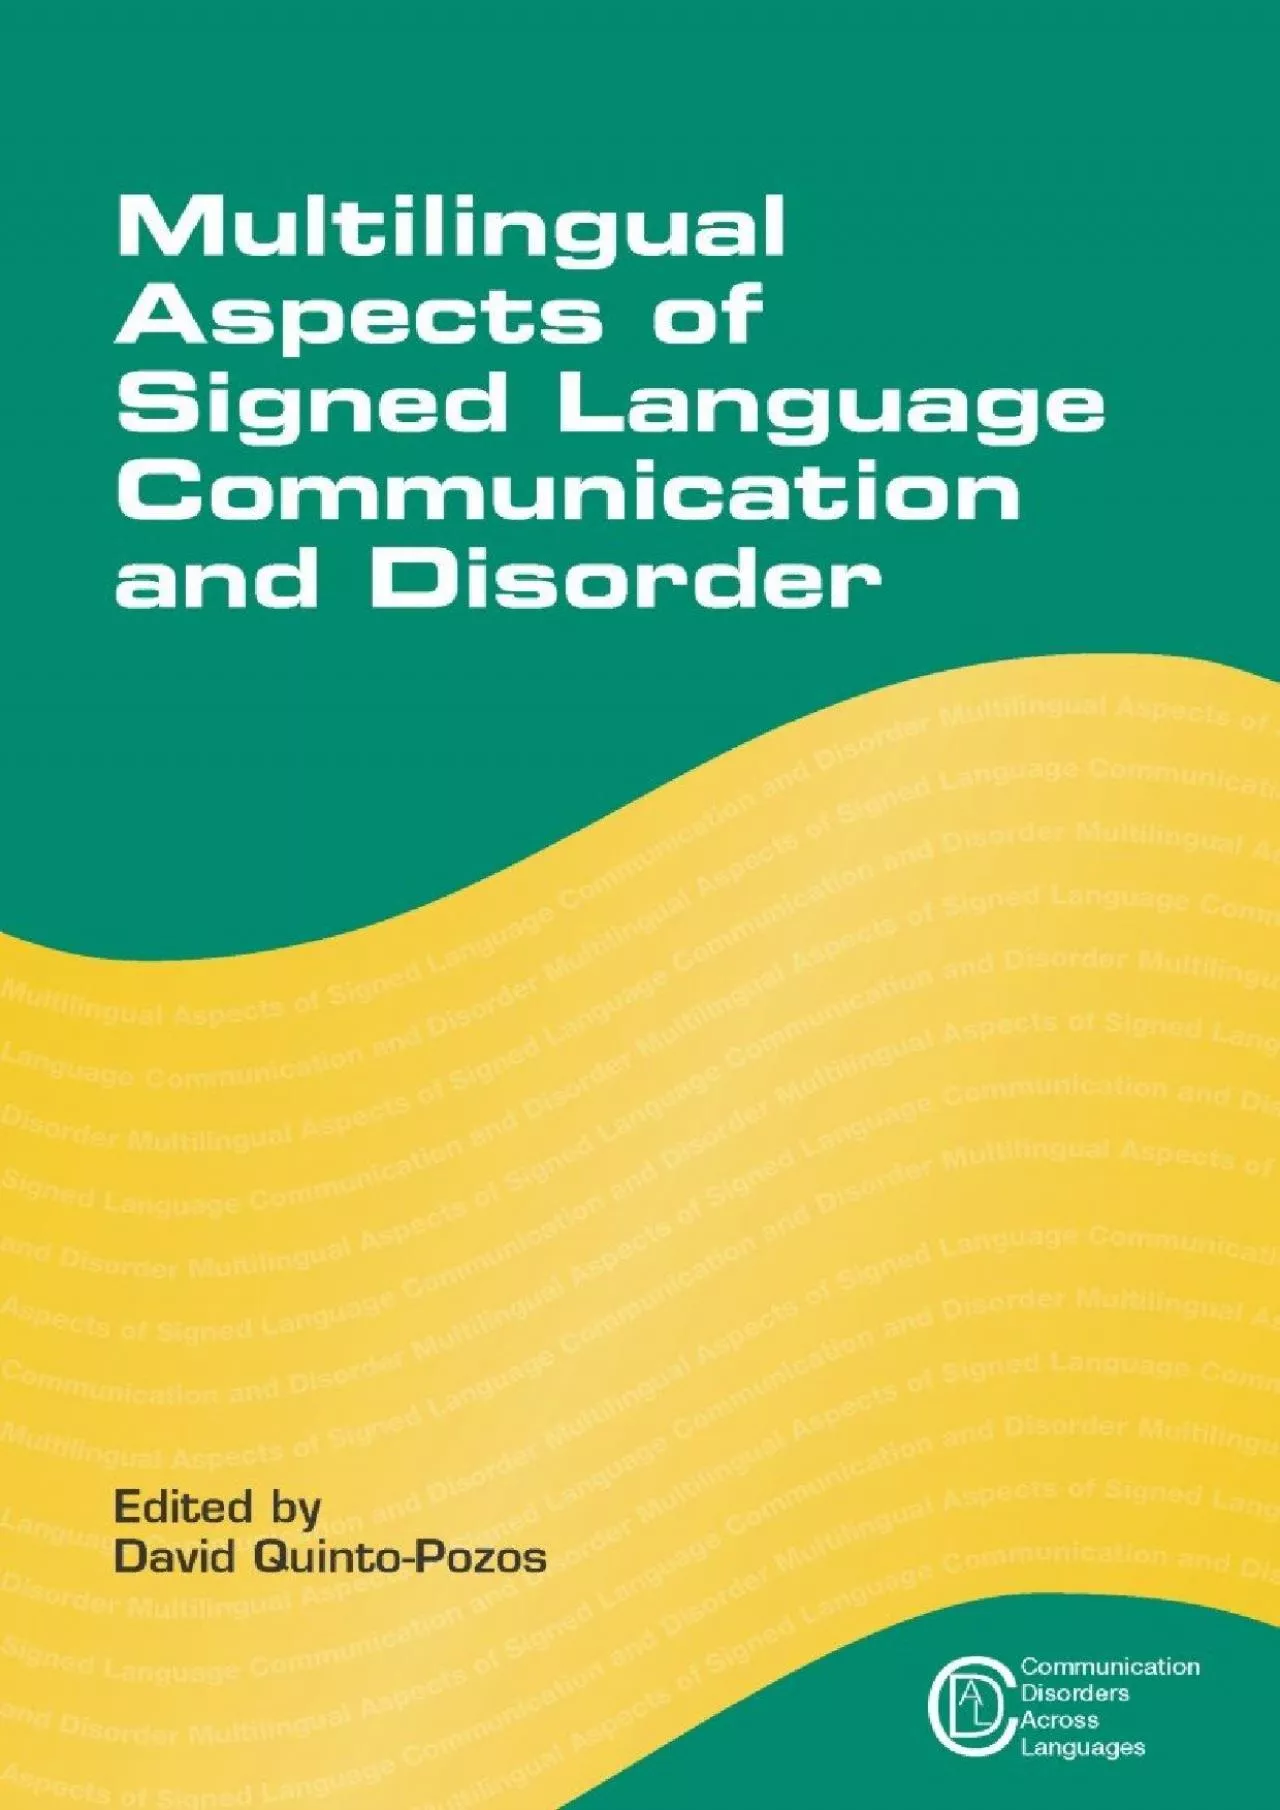 (DOWNLOAD)-Multilingual Aspects of Signed Language Communication and Disorder (Communication